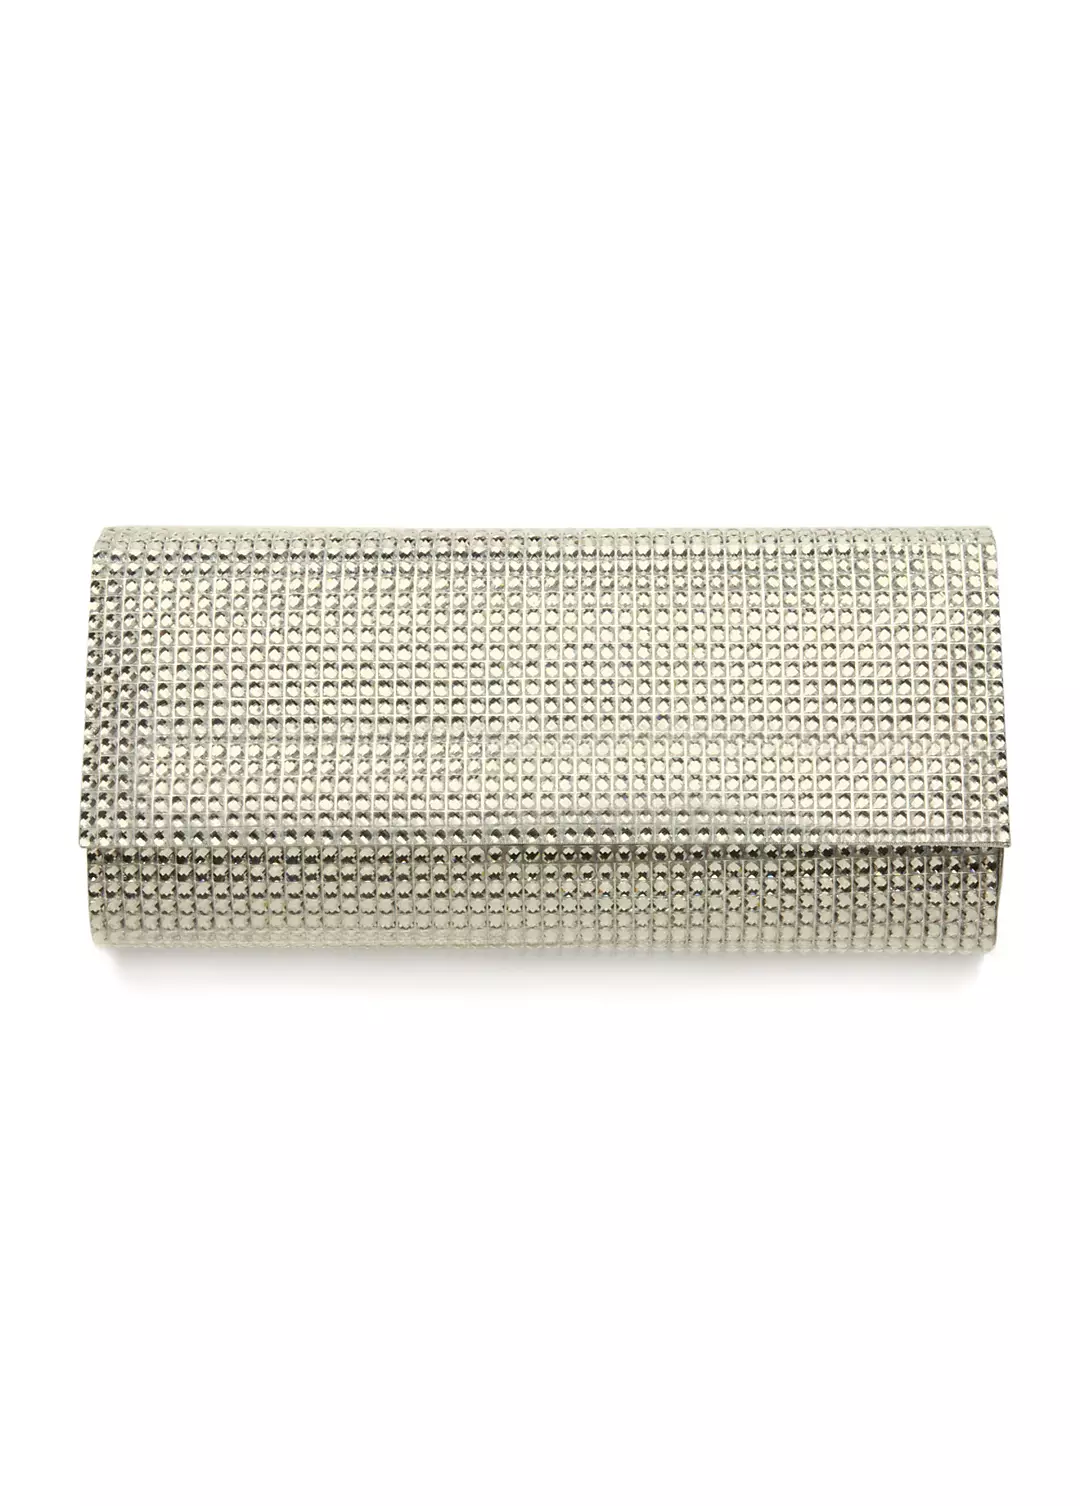 All Over Metallic Bling Clutch Image